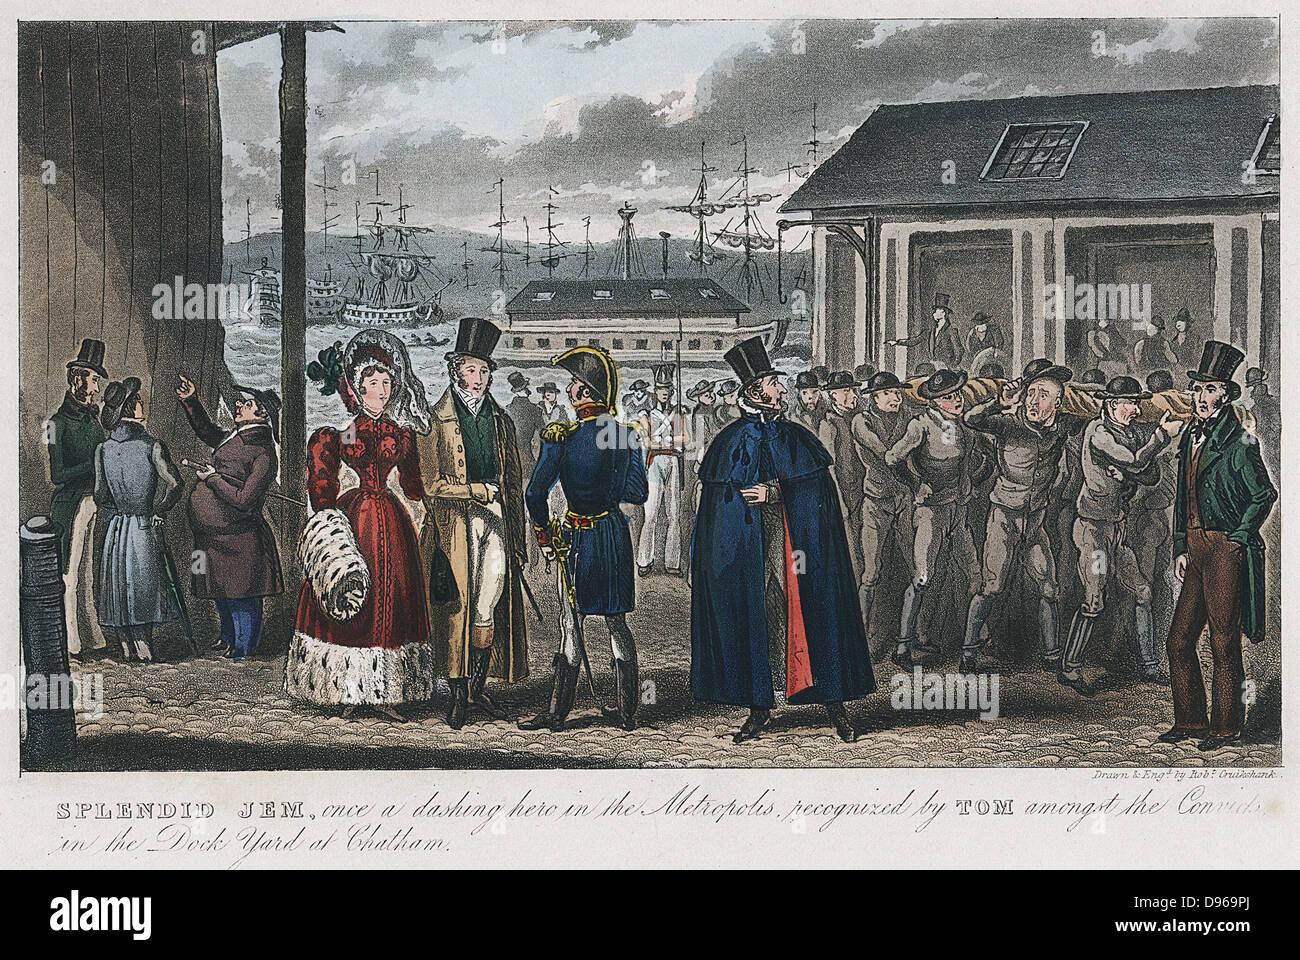 Splendid Jem', once a dashing hero in the Metropolis, recognised by Tom amongst the convicts in the Naval Dock Yard at Chatham'. Illustration by Robert Cruikshank for Pierce Egan 'Life in London', 1821. Aquatint. Prisoners housed in hulks (on River Medw Stock Photo